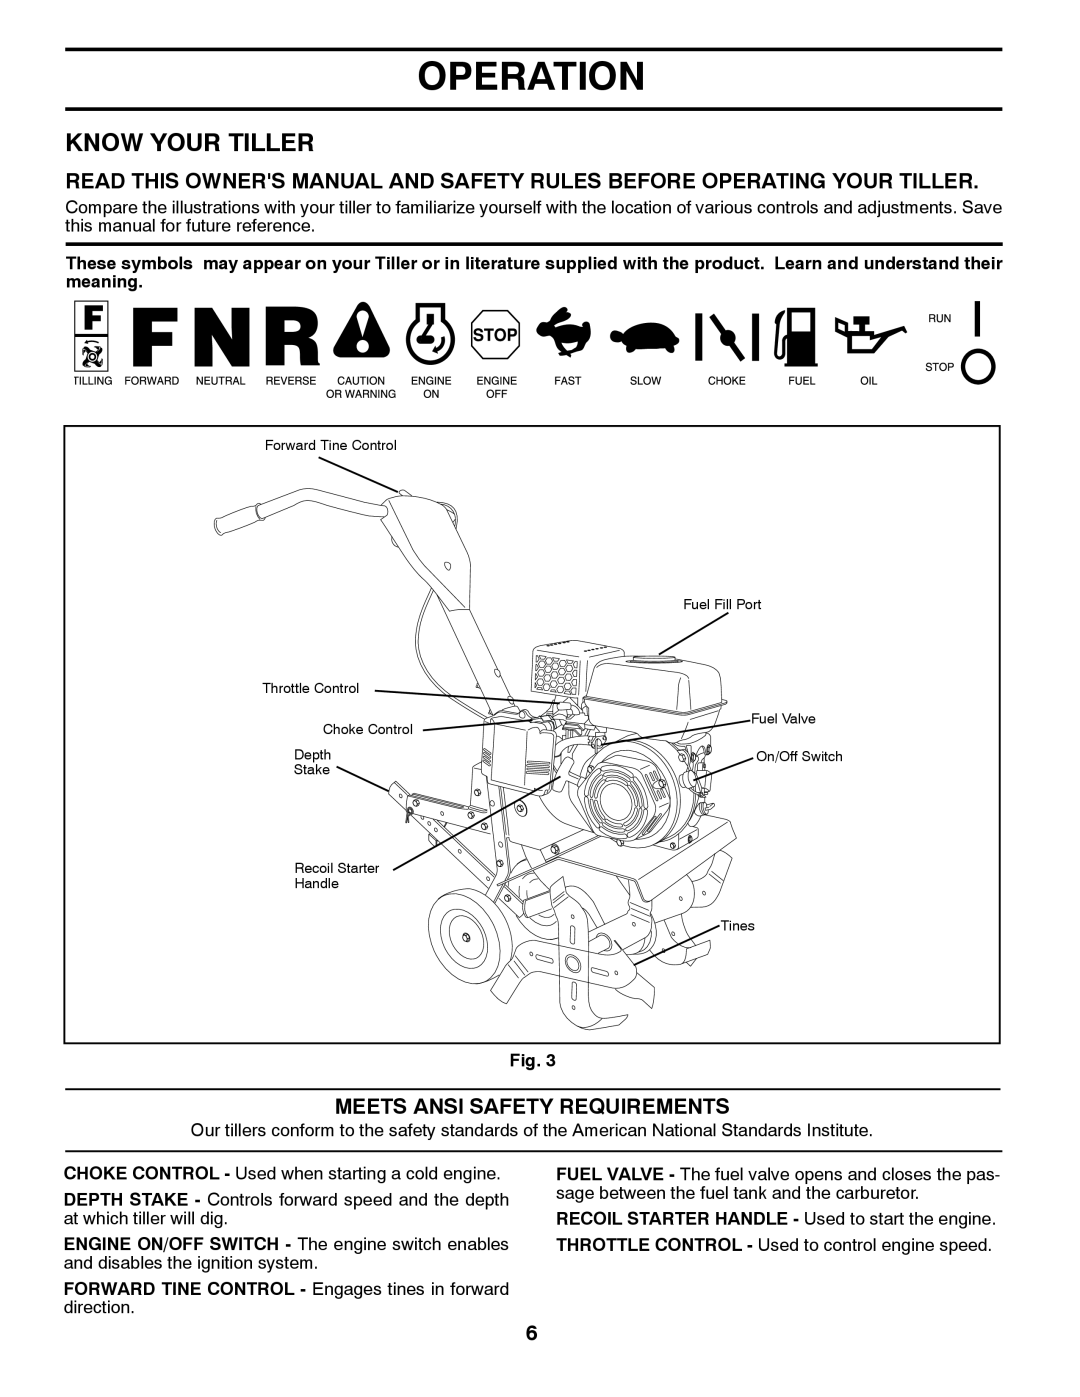 Poulan 96082001900, 432822 manual Operation, Know Your Tiller, Meets Ansi Safety Requirements, Fig 